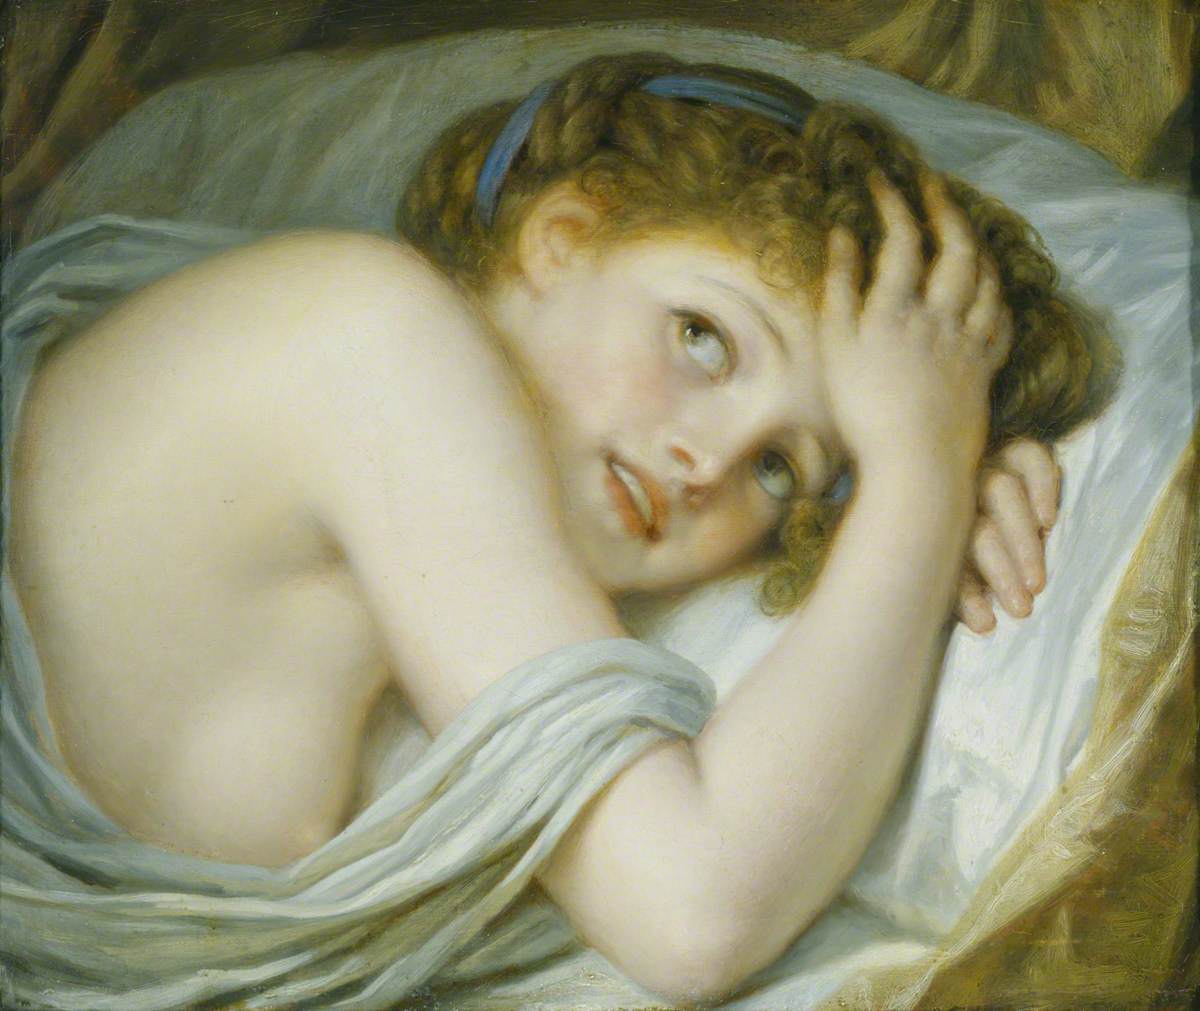 Half-Length of a Girl Lying in Bed